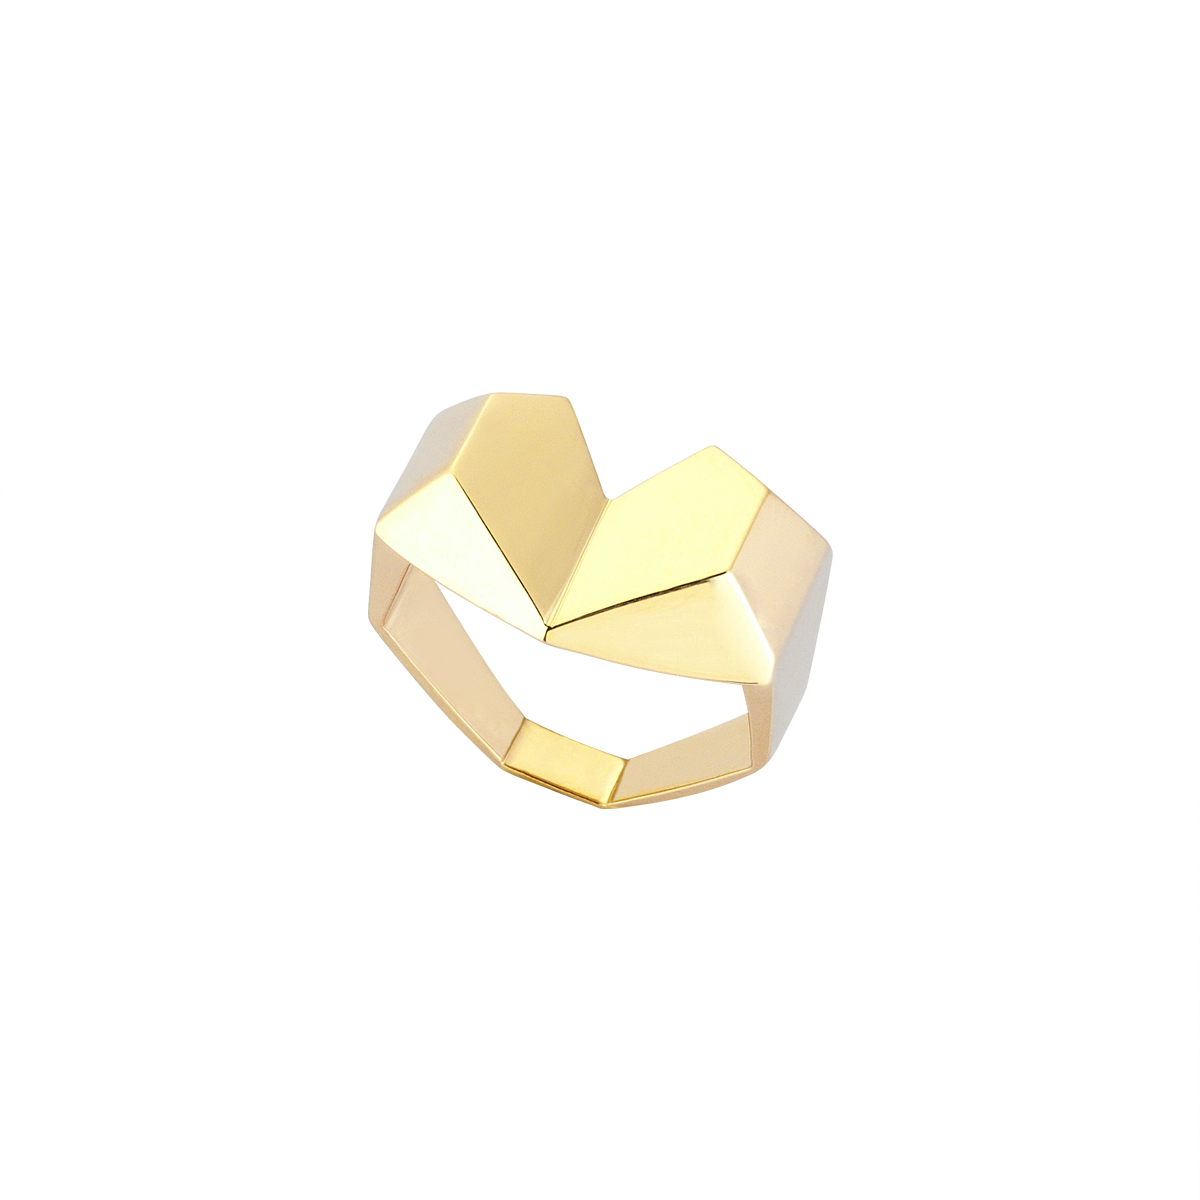 Origami Love Little Finger Ring in Yellow Gold - Her Story Shop